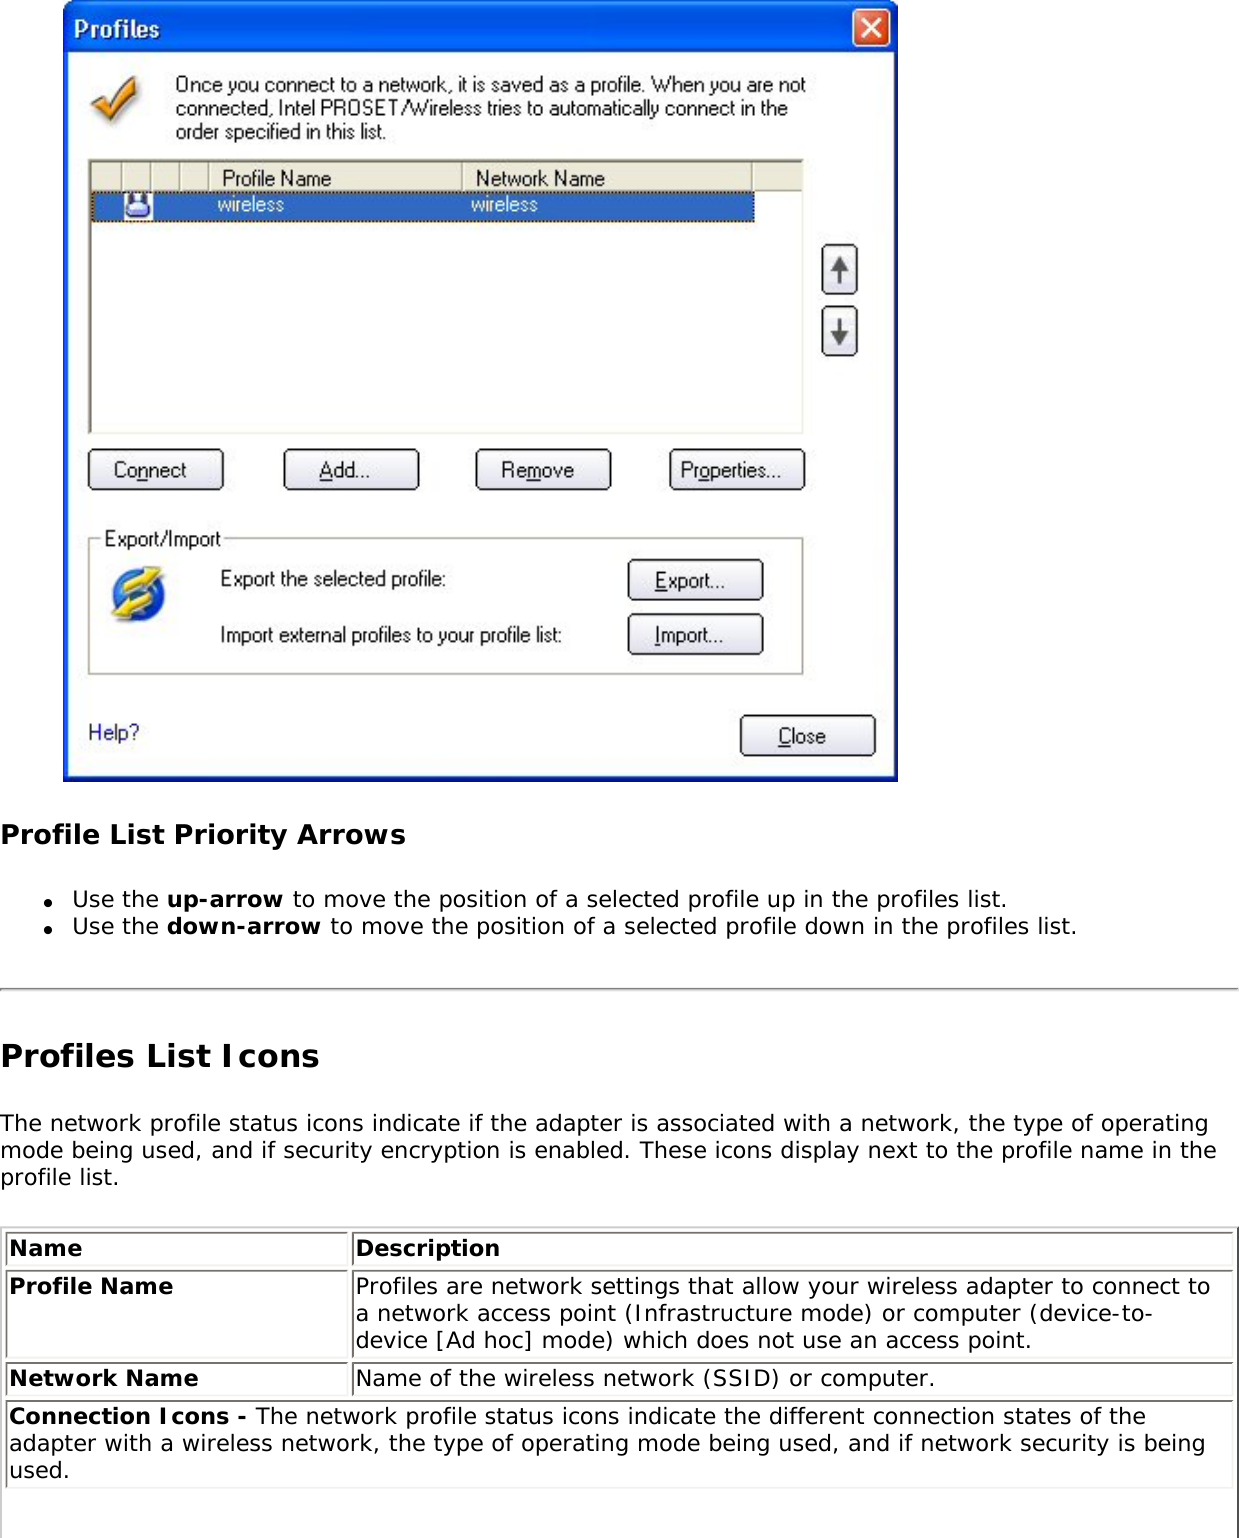  Profile List Priority Arrows●     Use the up-arrow to move the position of a selected profile up in the profiles list.●     Use the down-arrow to move the position of a selected profile down in the profiles list.Profiles List Icons The network profile status icons indicate if the adapter is associated with a network, the type of operating mode being used, and if security encryption is enabled. These icons display next to the profile name in the profile list. Name DescriptionProfile Name Profiles are network settings that allow your wireless adapter to connect to a network access point (Infrastructure mode) or computer (device-to-device [Ad hoc] mode) which does not use an access point. Network Name Name of the wireless network (SSID) or computer.Connection Icons - The network profile status icons indicate the different connection states of the adapter with a wireless network, the type of operating mode being used, and if network security is being used. 